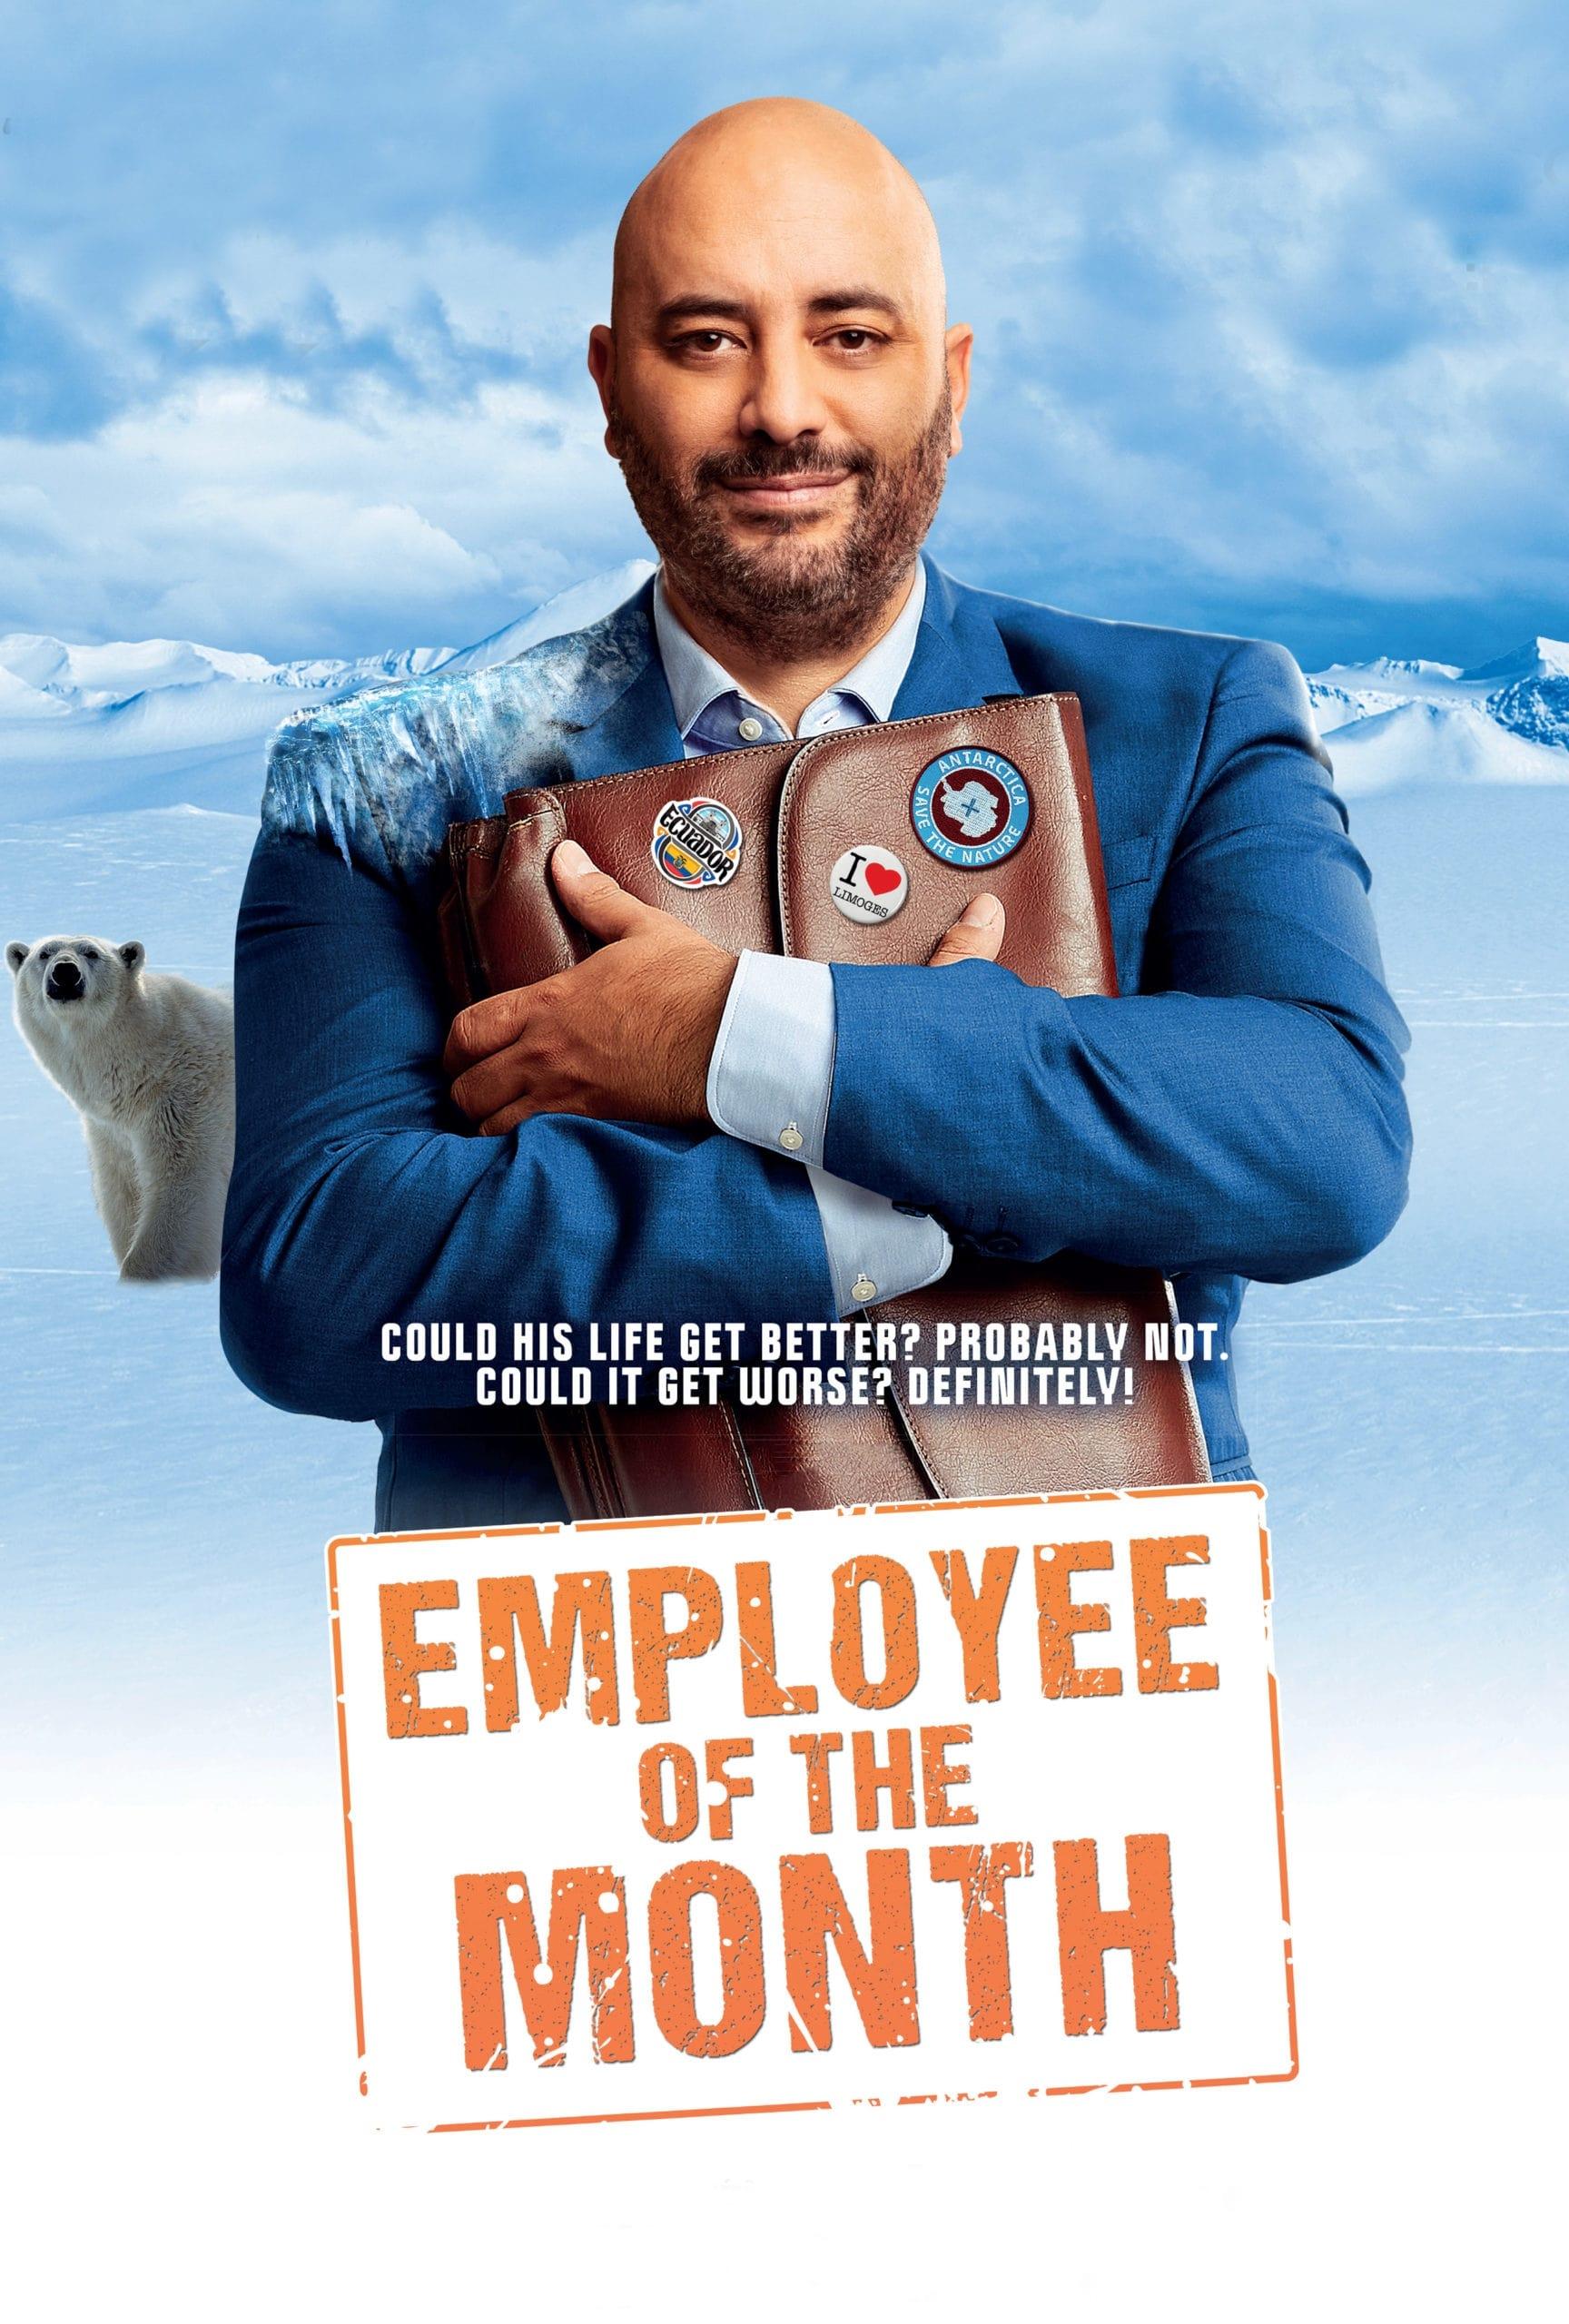 Employee of the Month poster